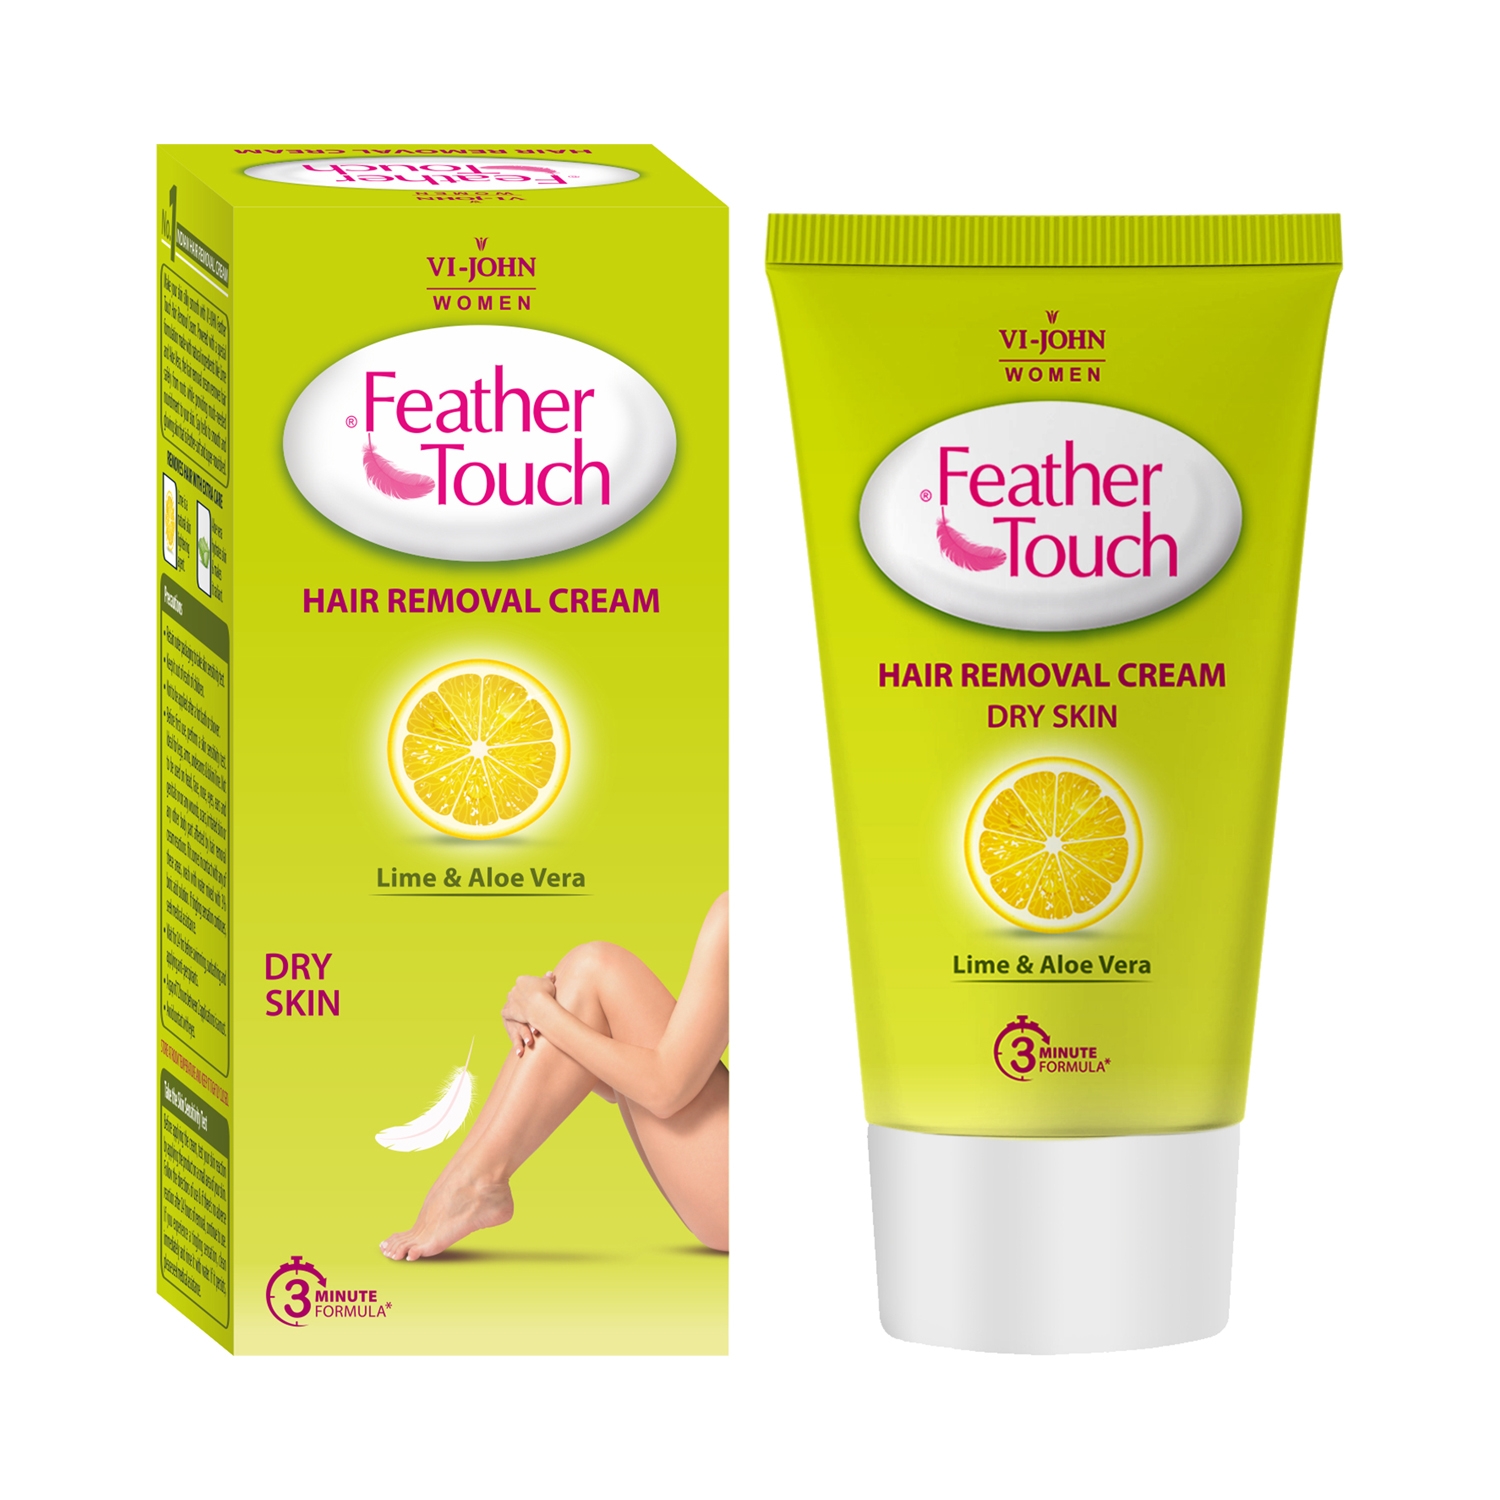 VI-JOHN Feather Touch Hair Removal Cream With Lime & Aloe Vera Tube For Dry Skin (40g)